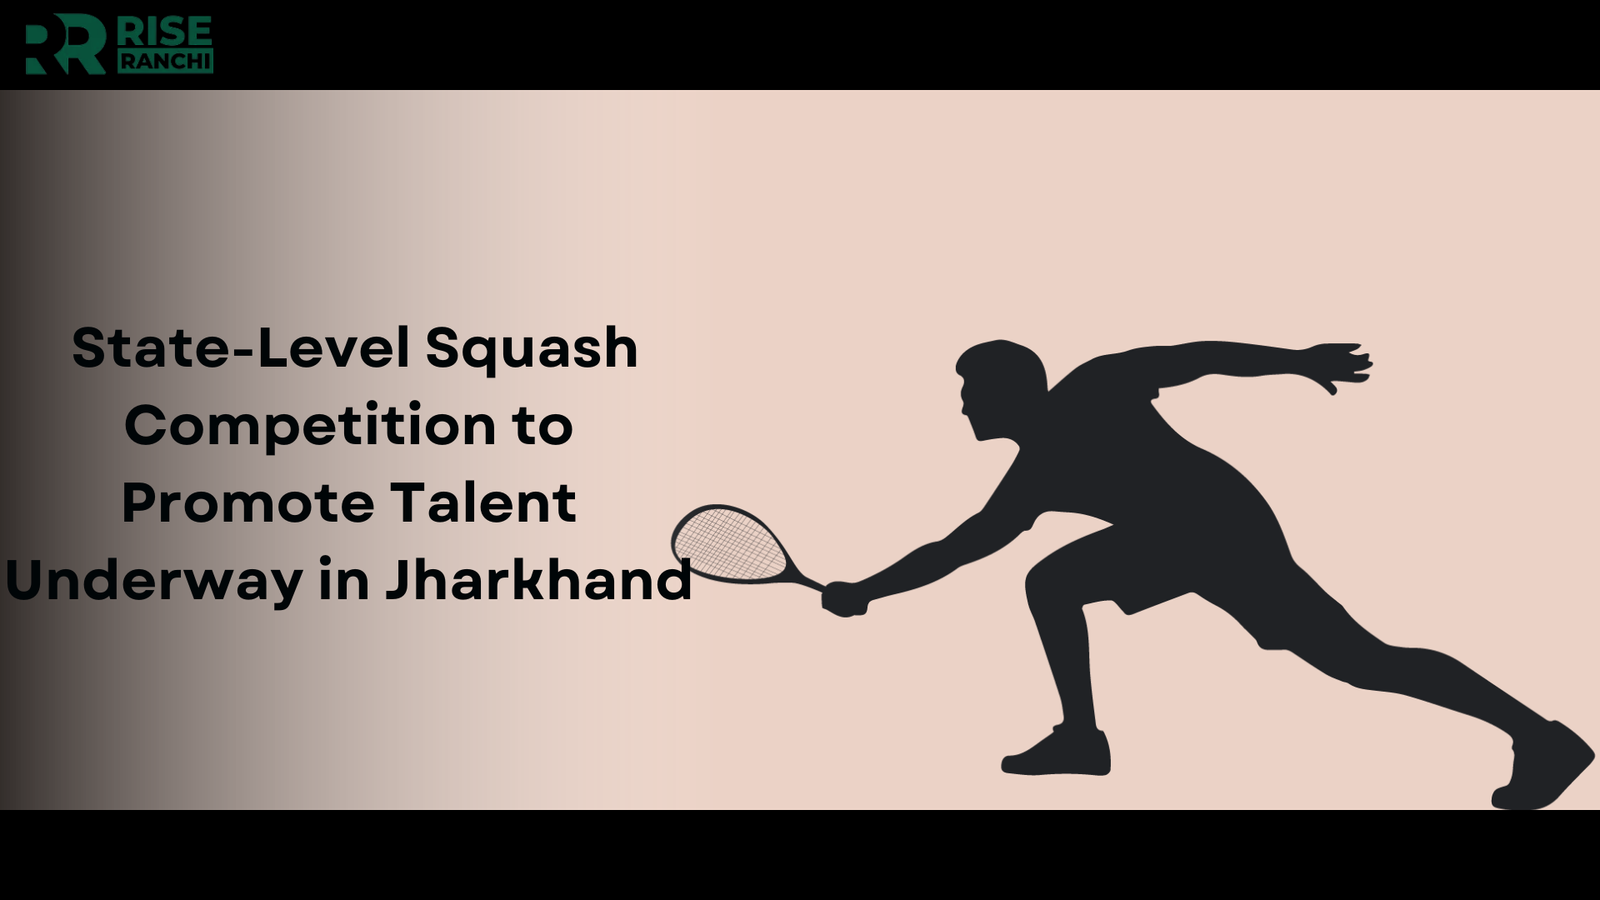 'Jharkhand's Khelo' Jharkhand Initiative to Host State-Level Squash Competition